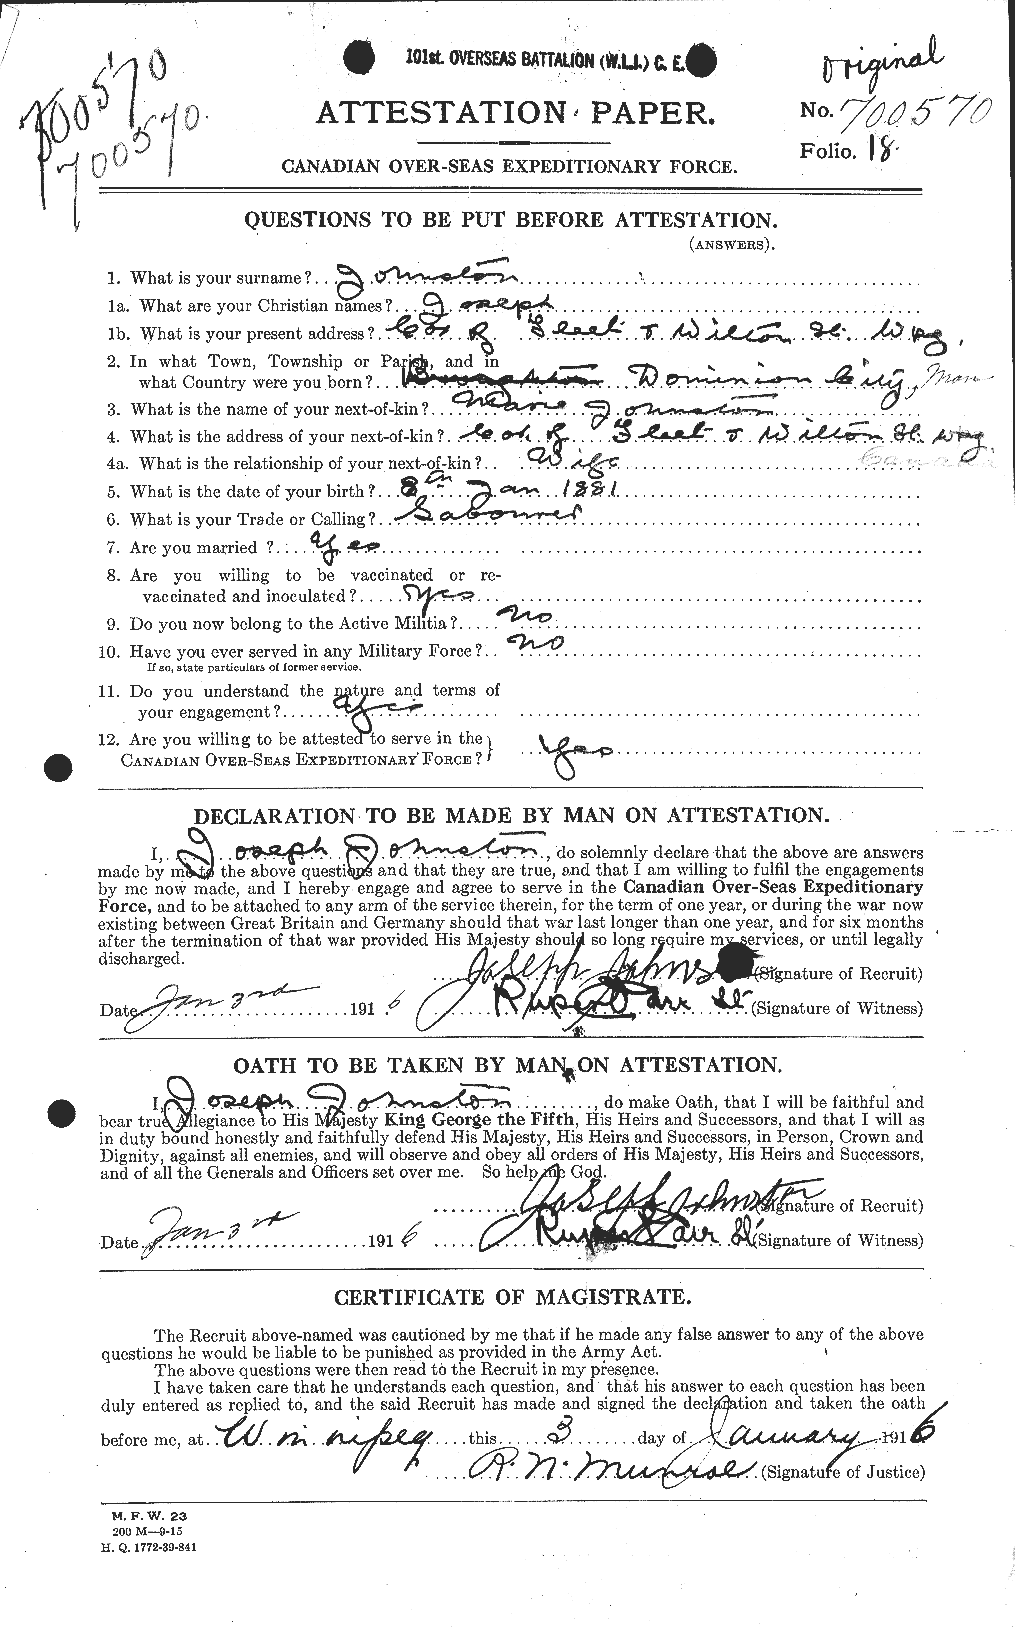 Personnel Records of the First World War - CEF 422898a